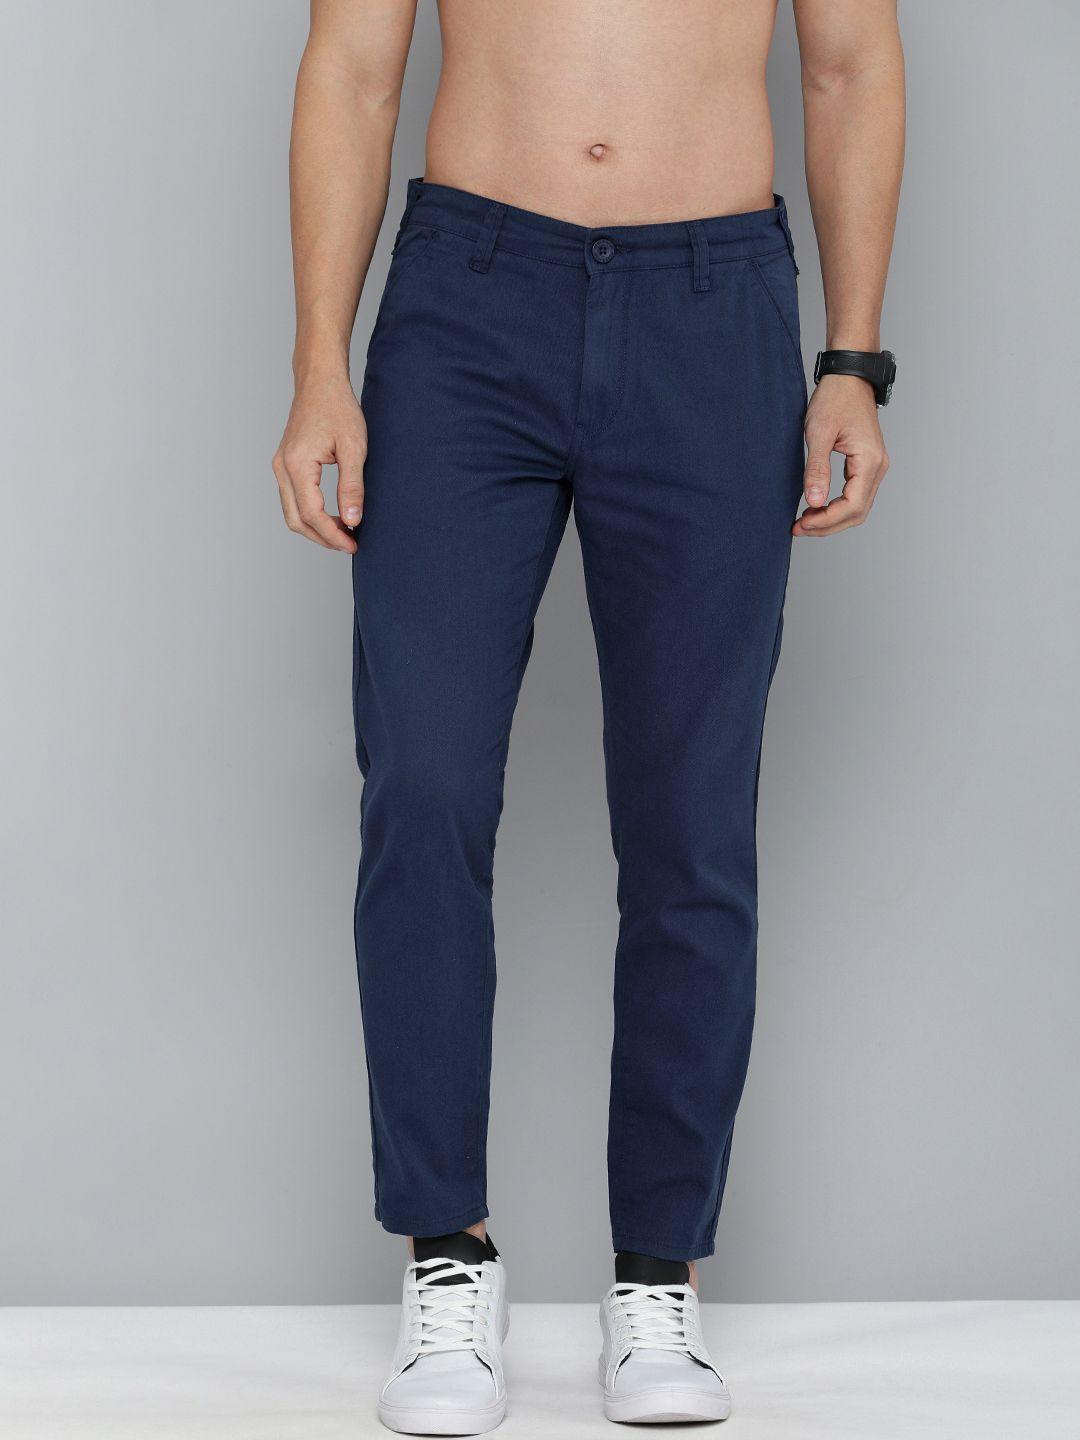 here&now men navy blue solid regular fit chinos trousers